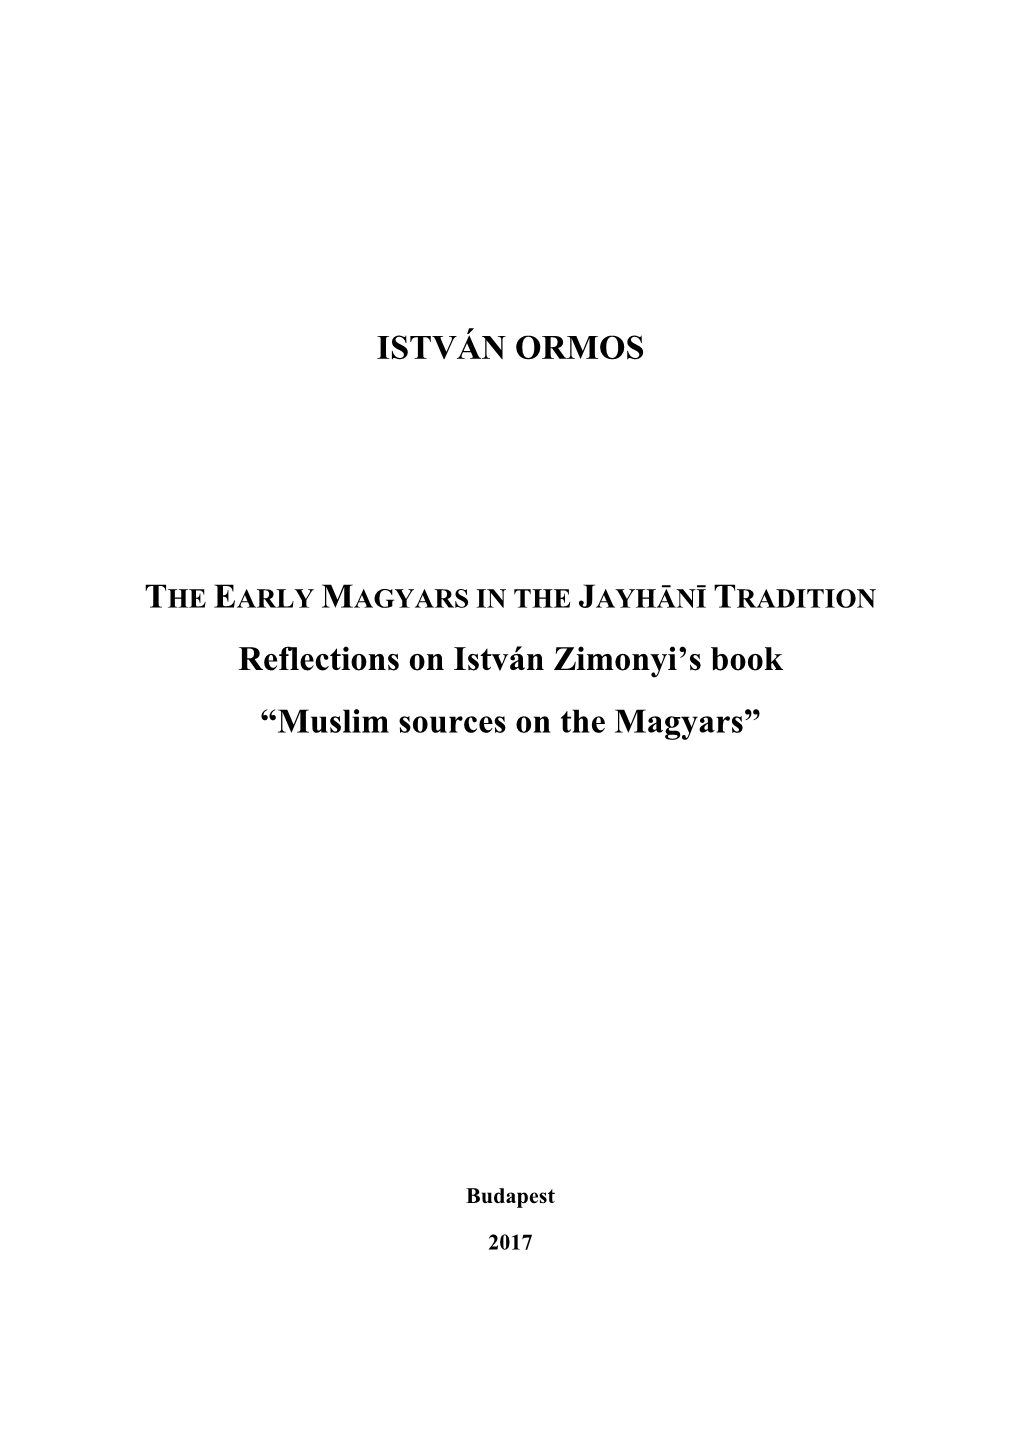 Muslim Sources on the Magyars”